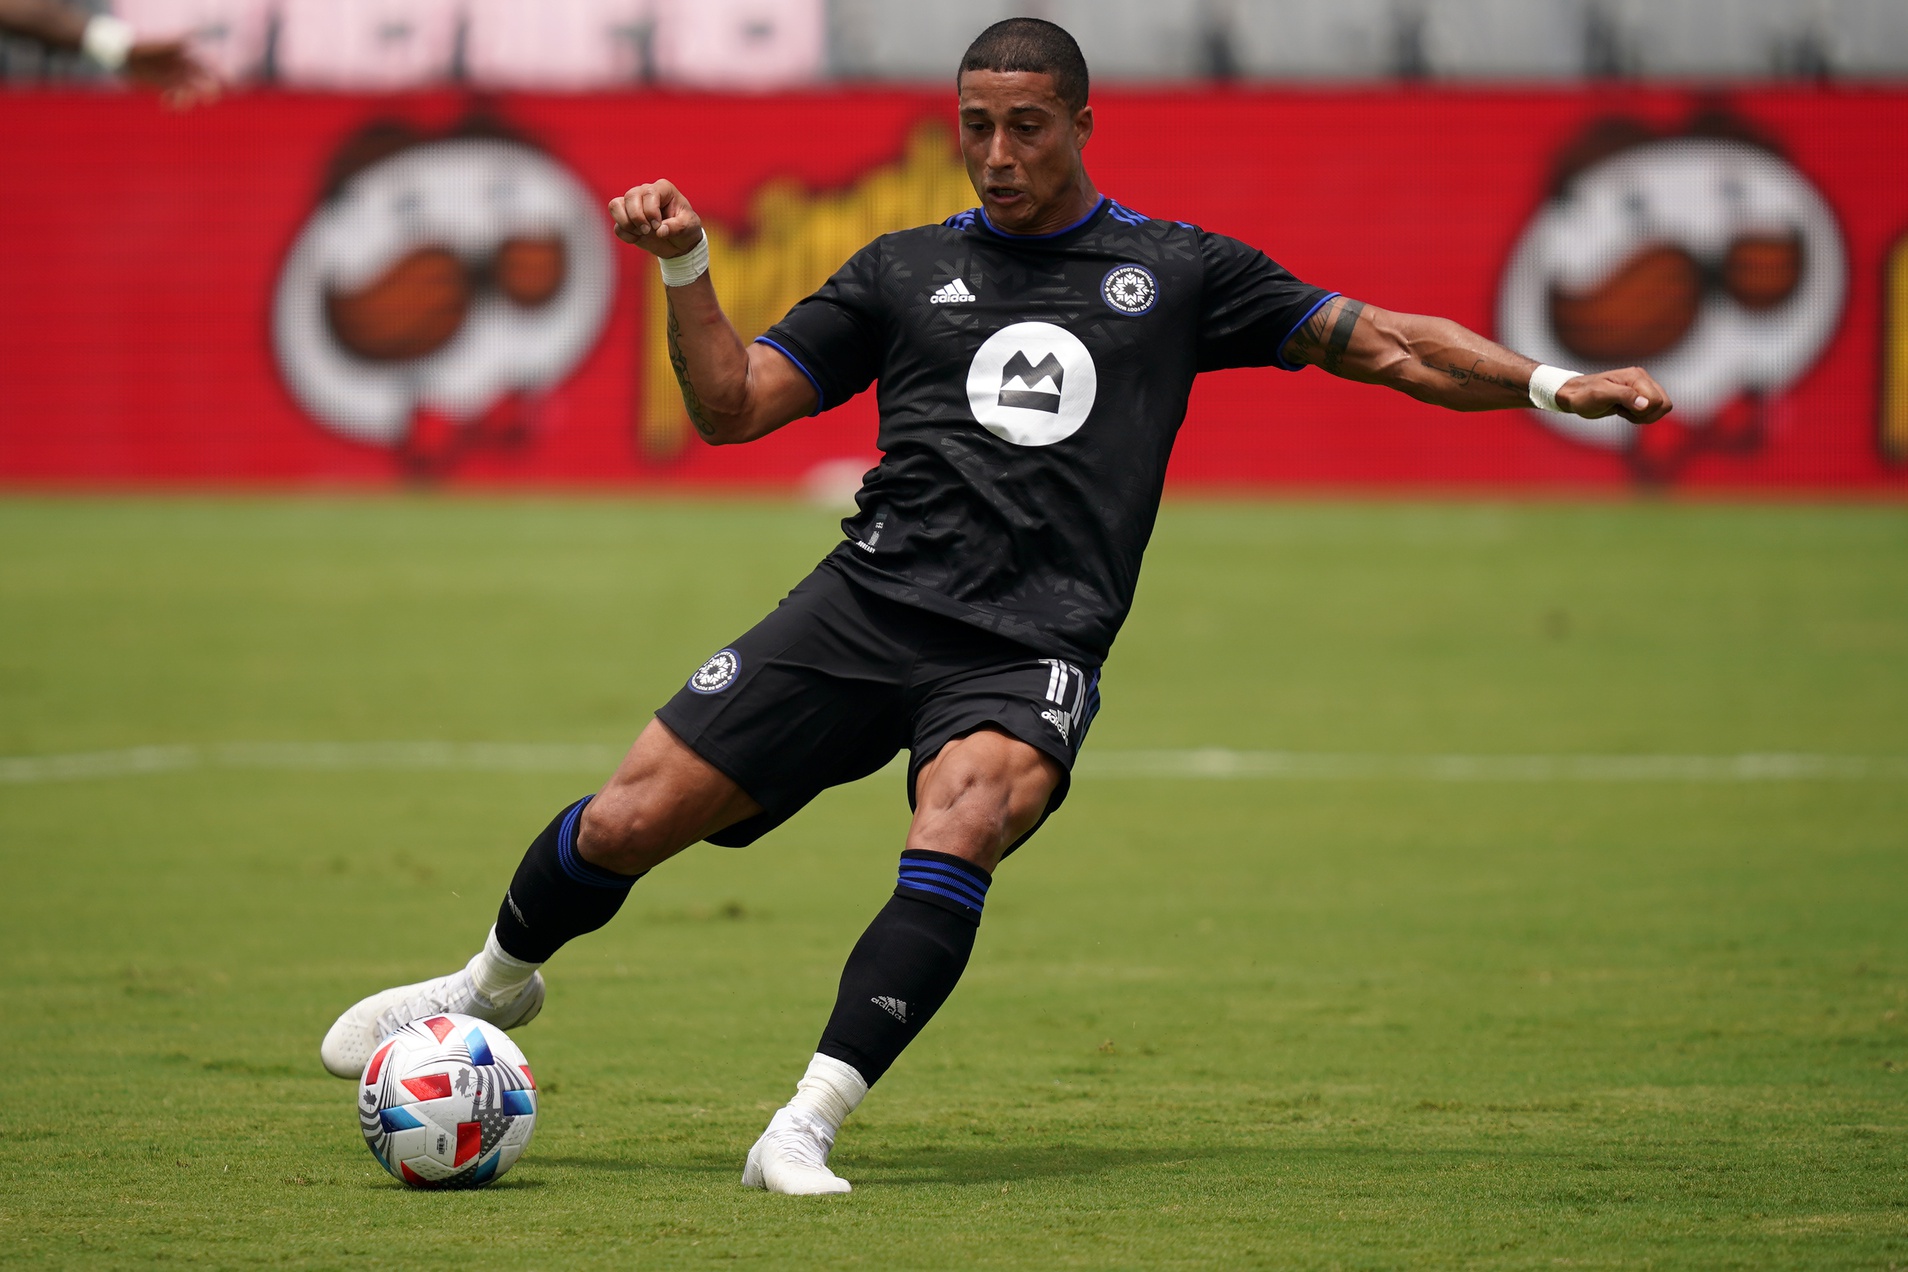 MLS Player Traded After Refusal to Get COVID Vaccine Results in “Problematic” Travel Issue